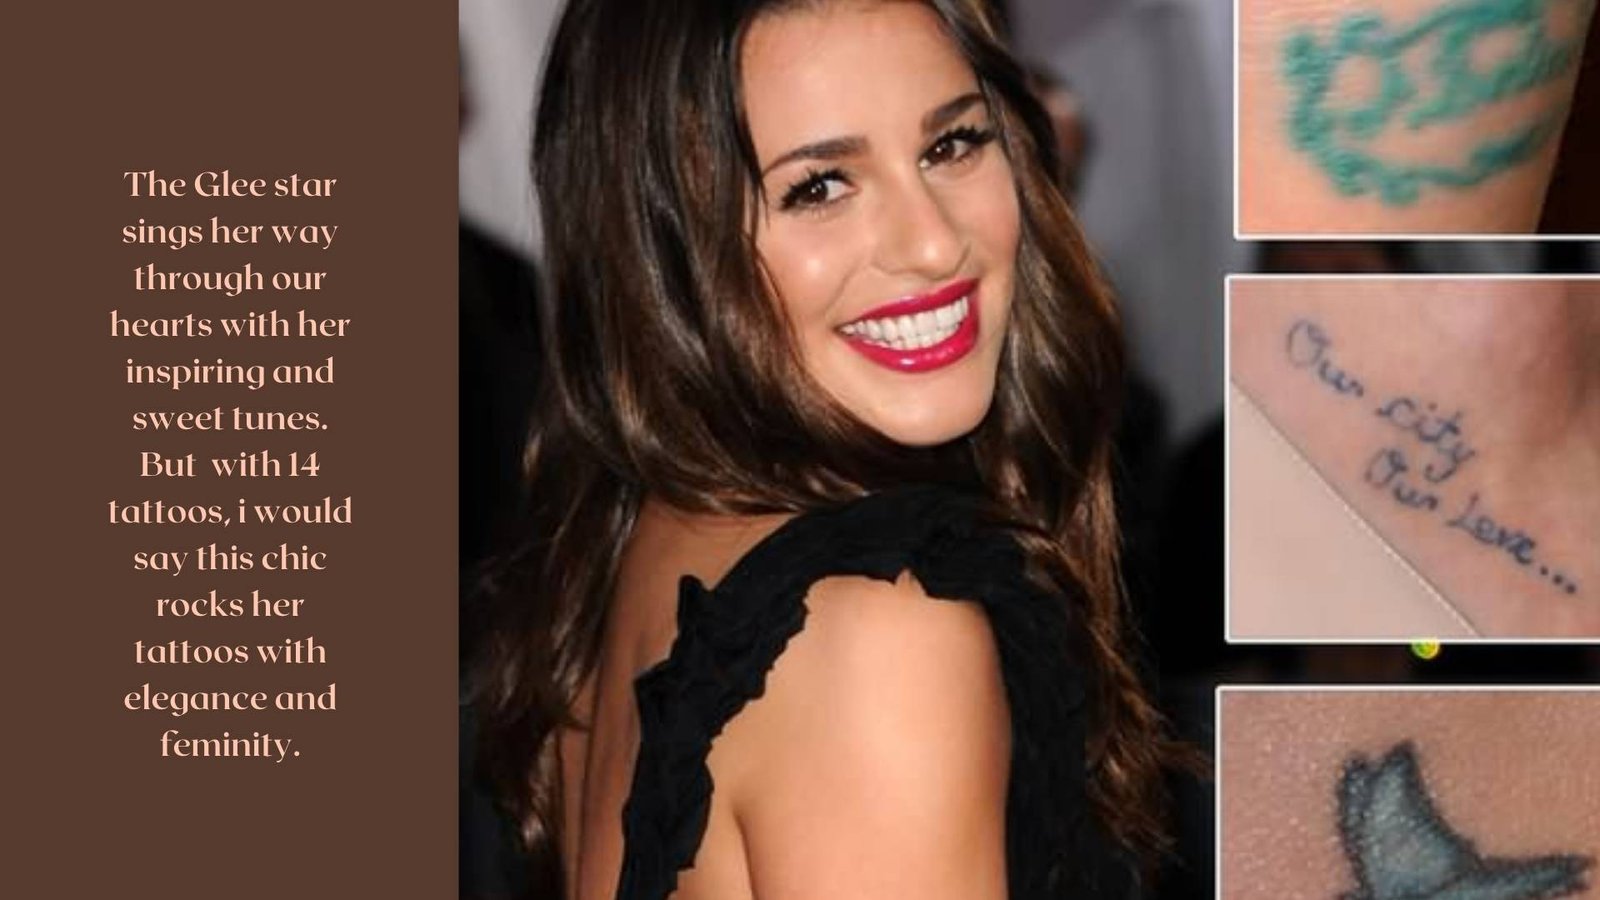 Lea Michele’s Tattoos & Their Meanings